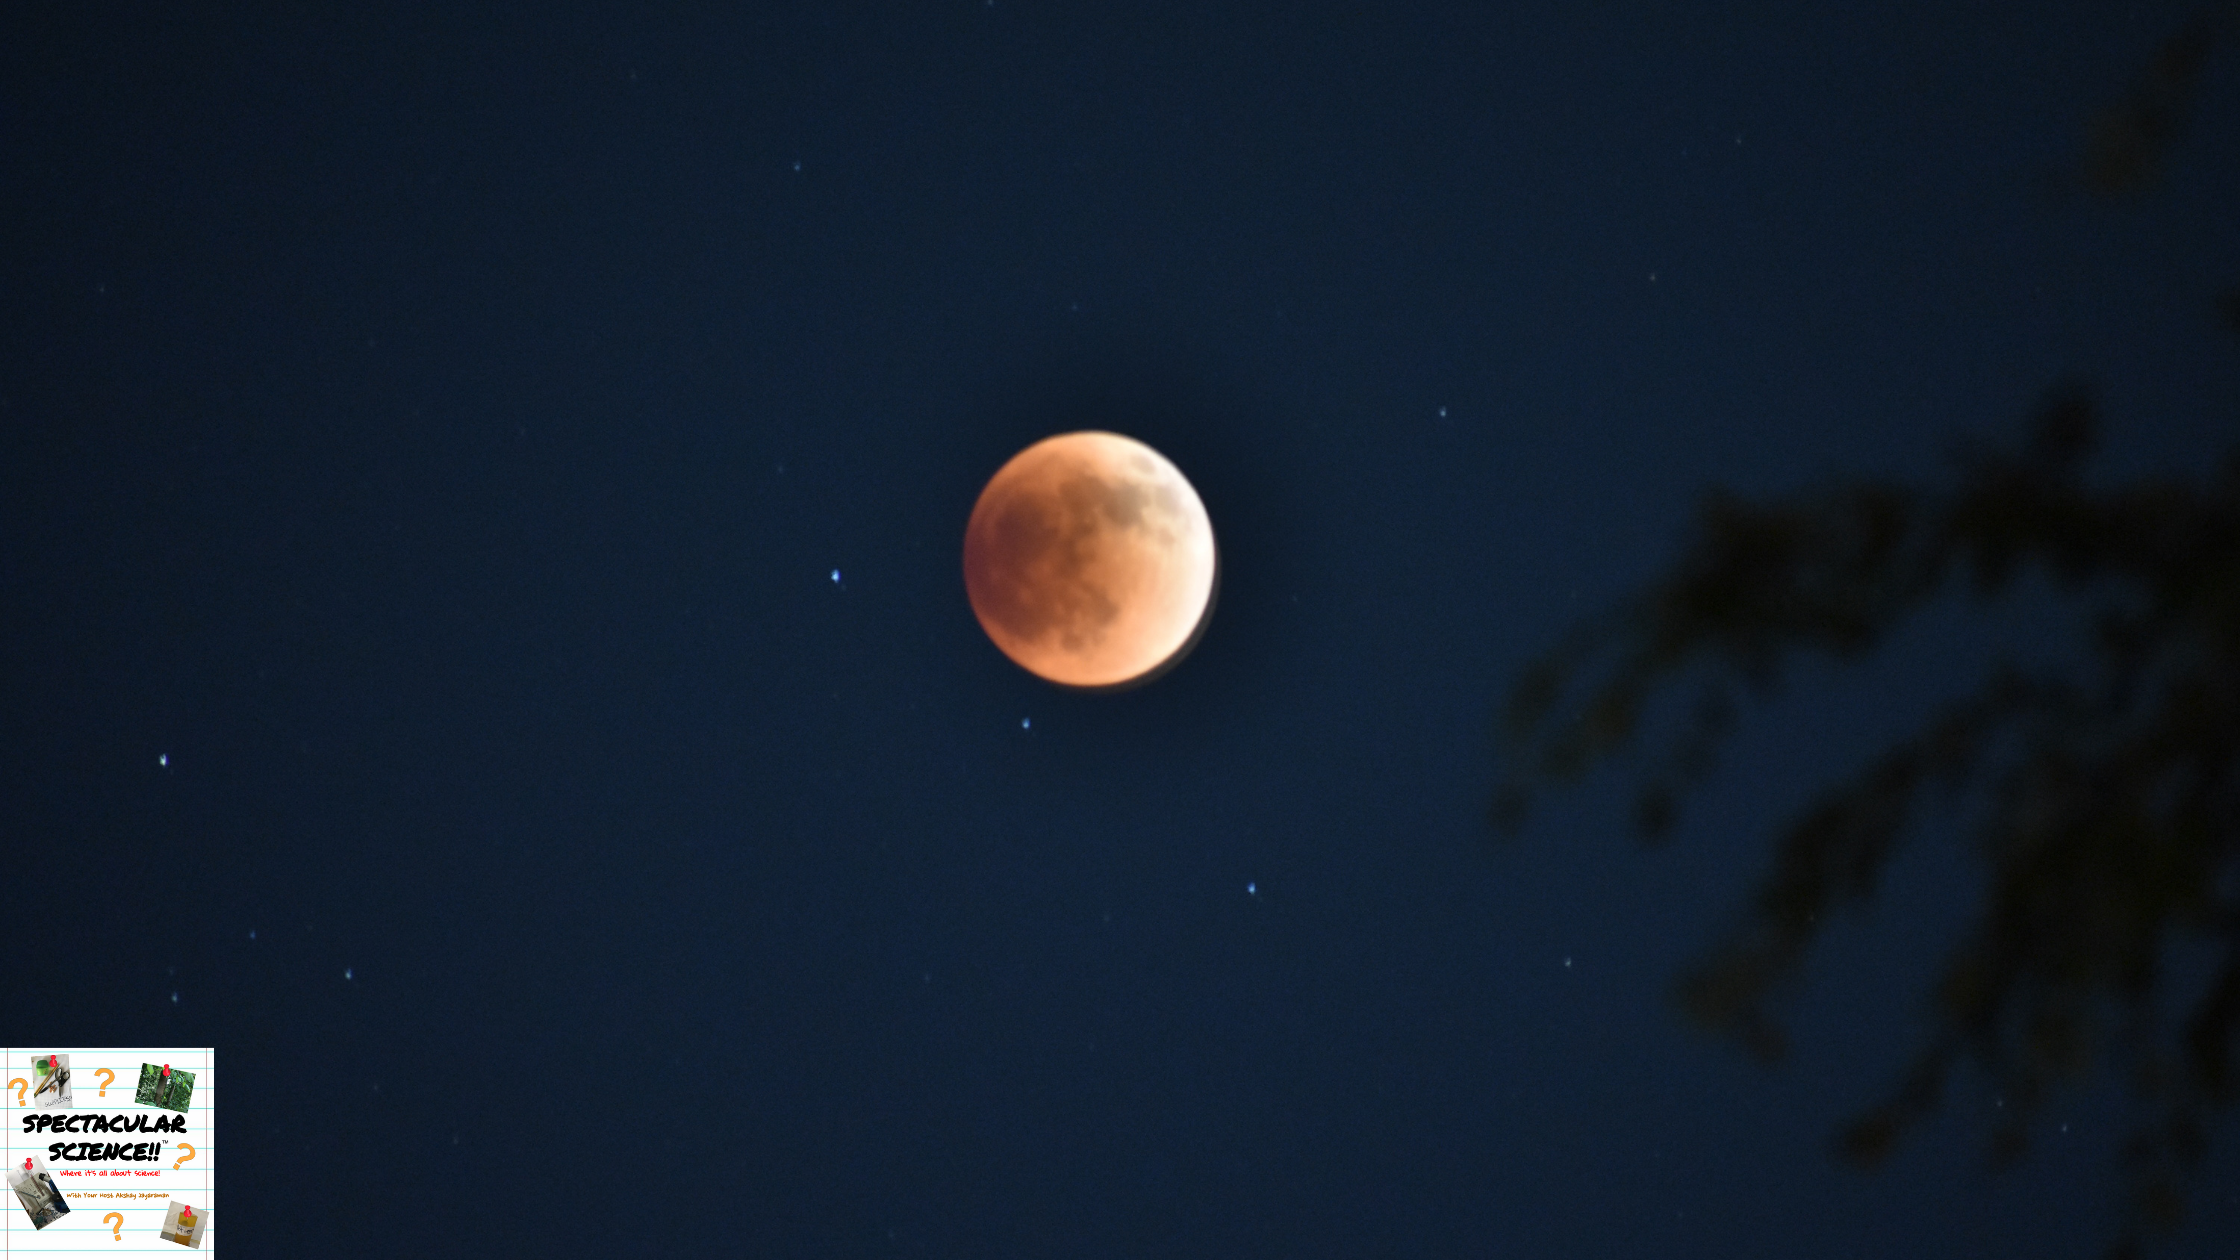 Spectacular Science May 2022 Lunar Eclipse Photo